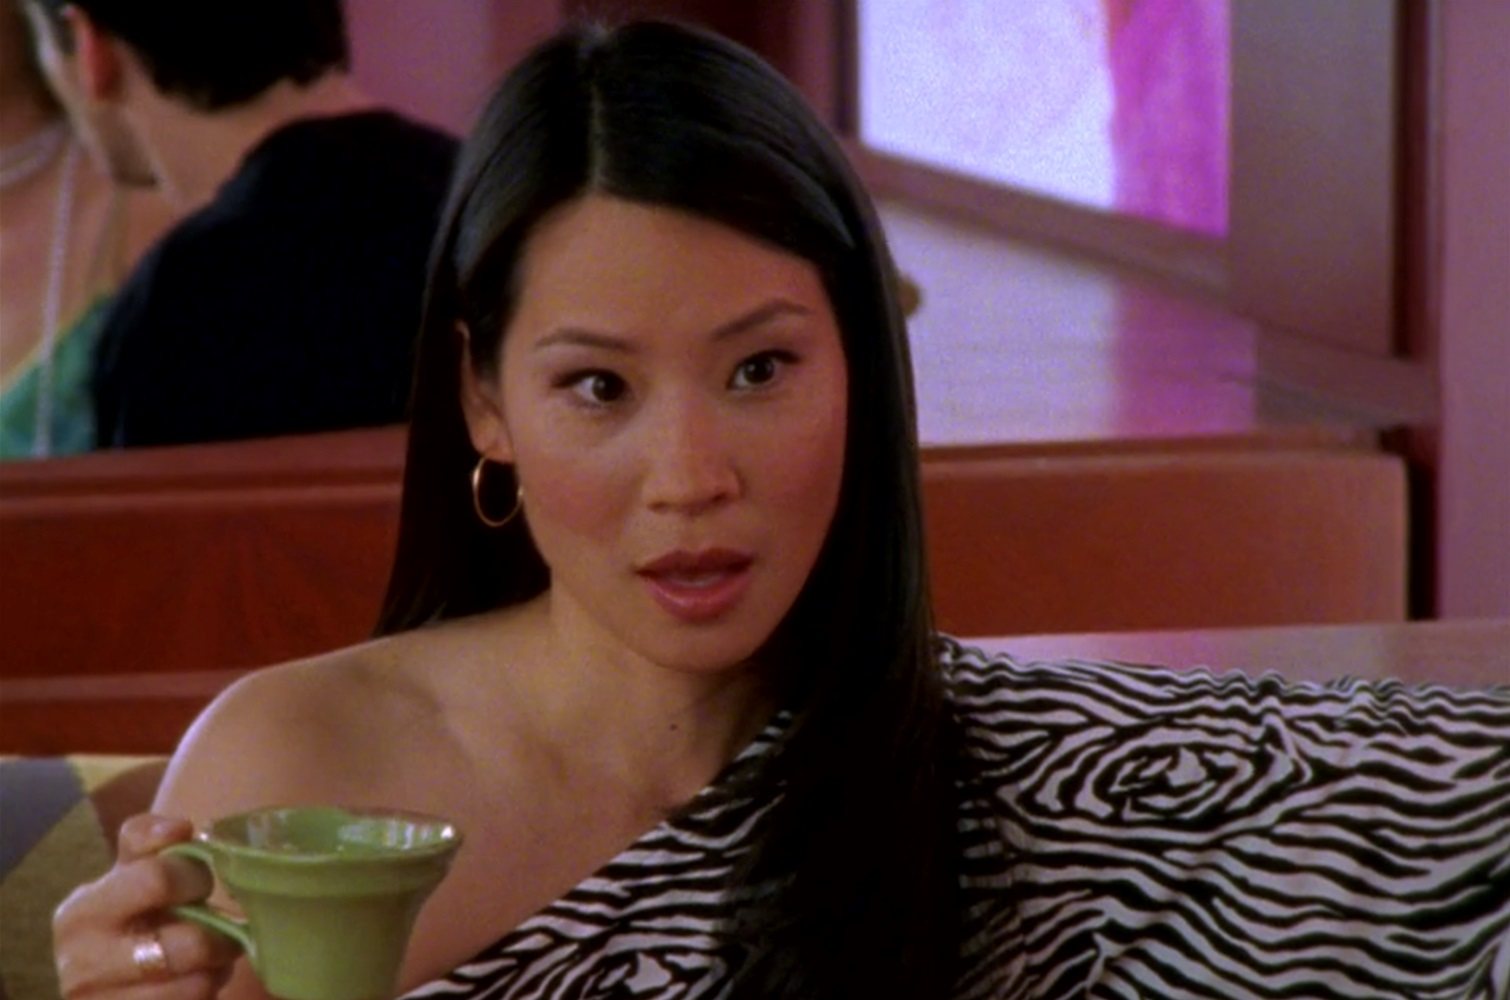 Actress Lucy Liu makes a stellar appearance - as herself - in season 4 of Sex and the City.